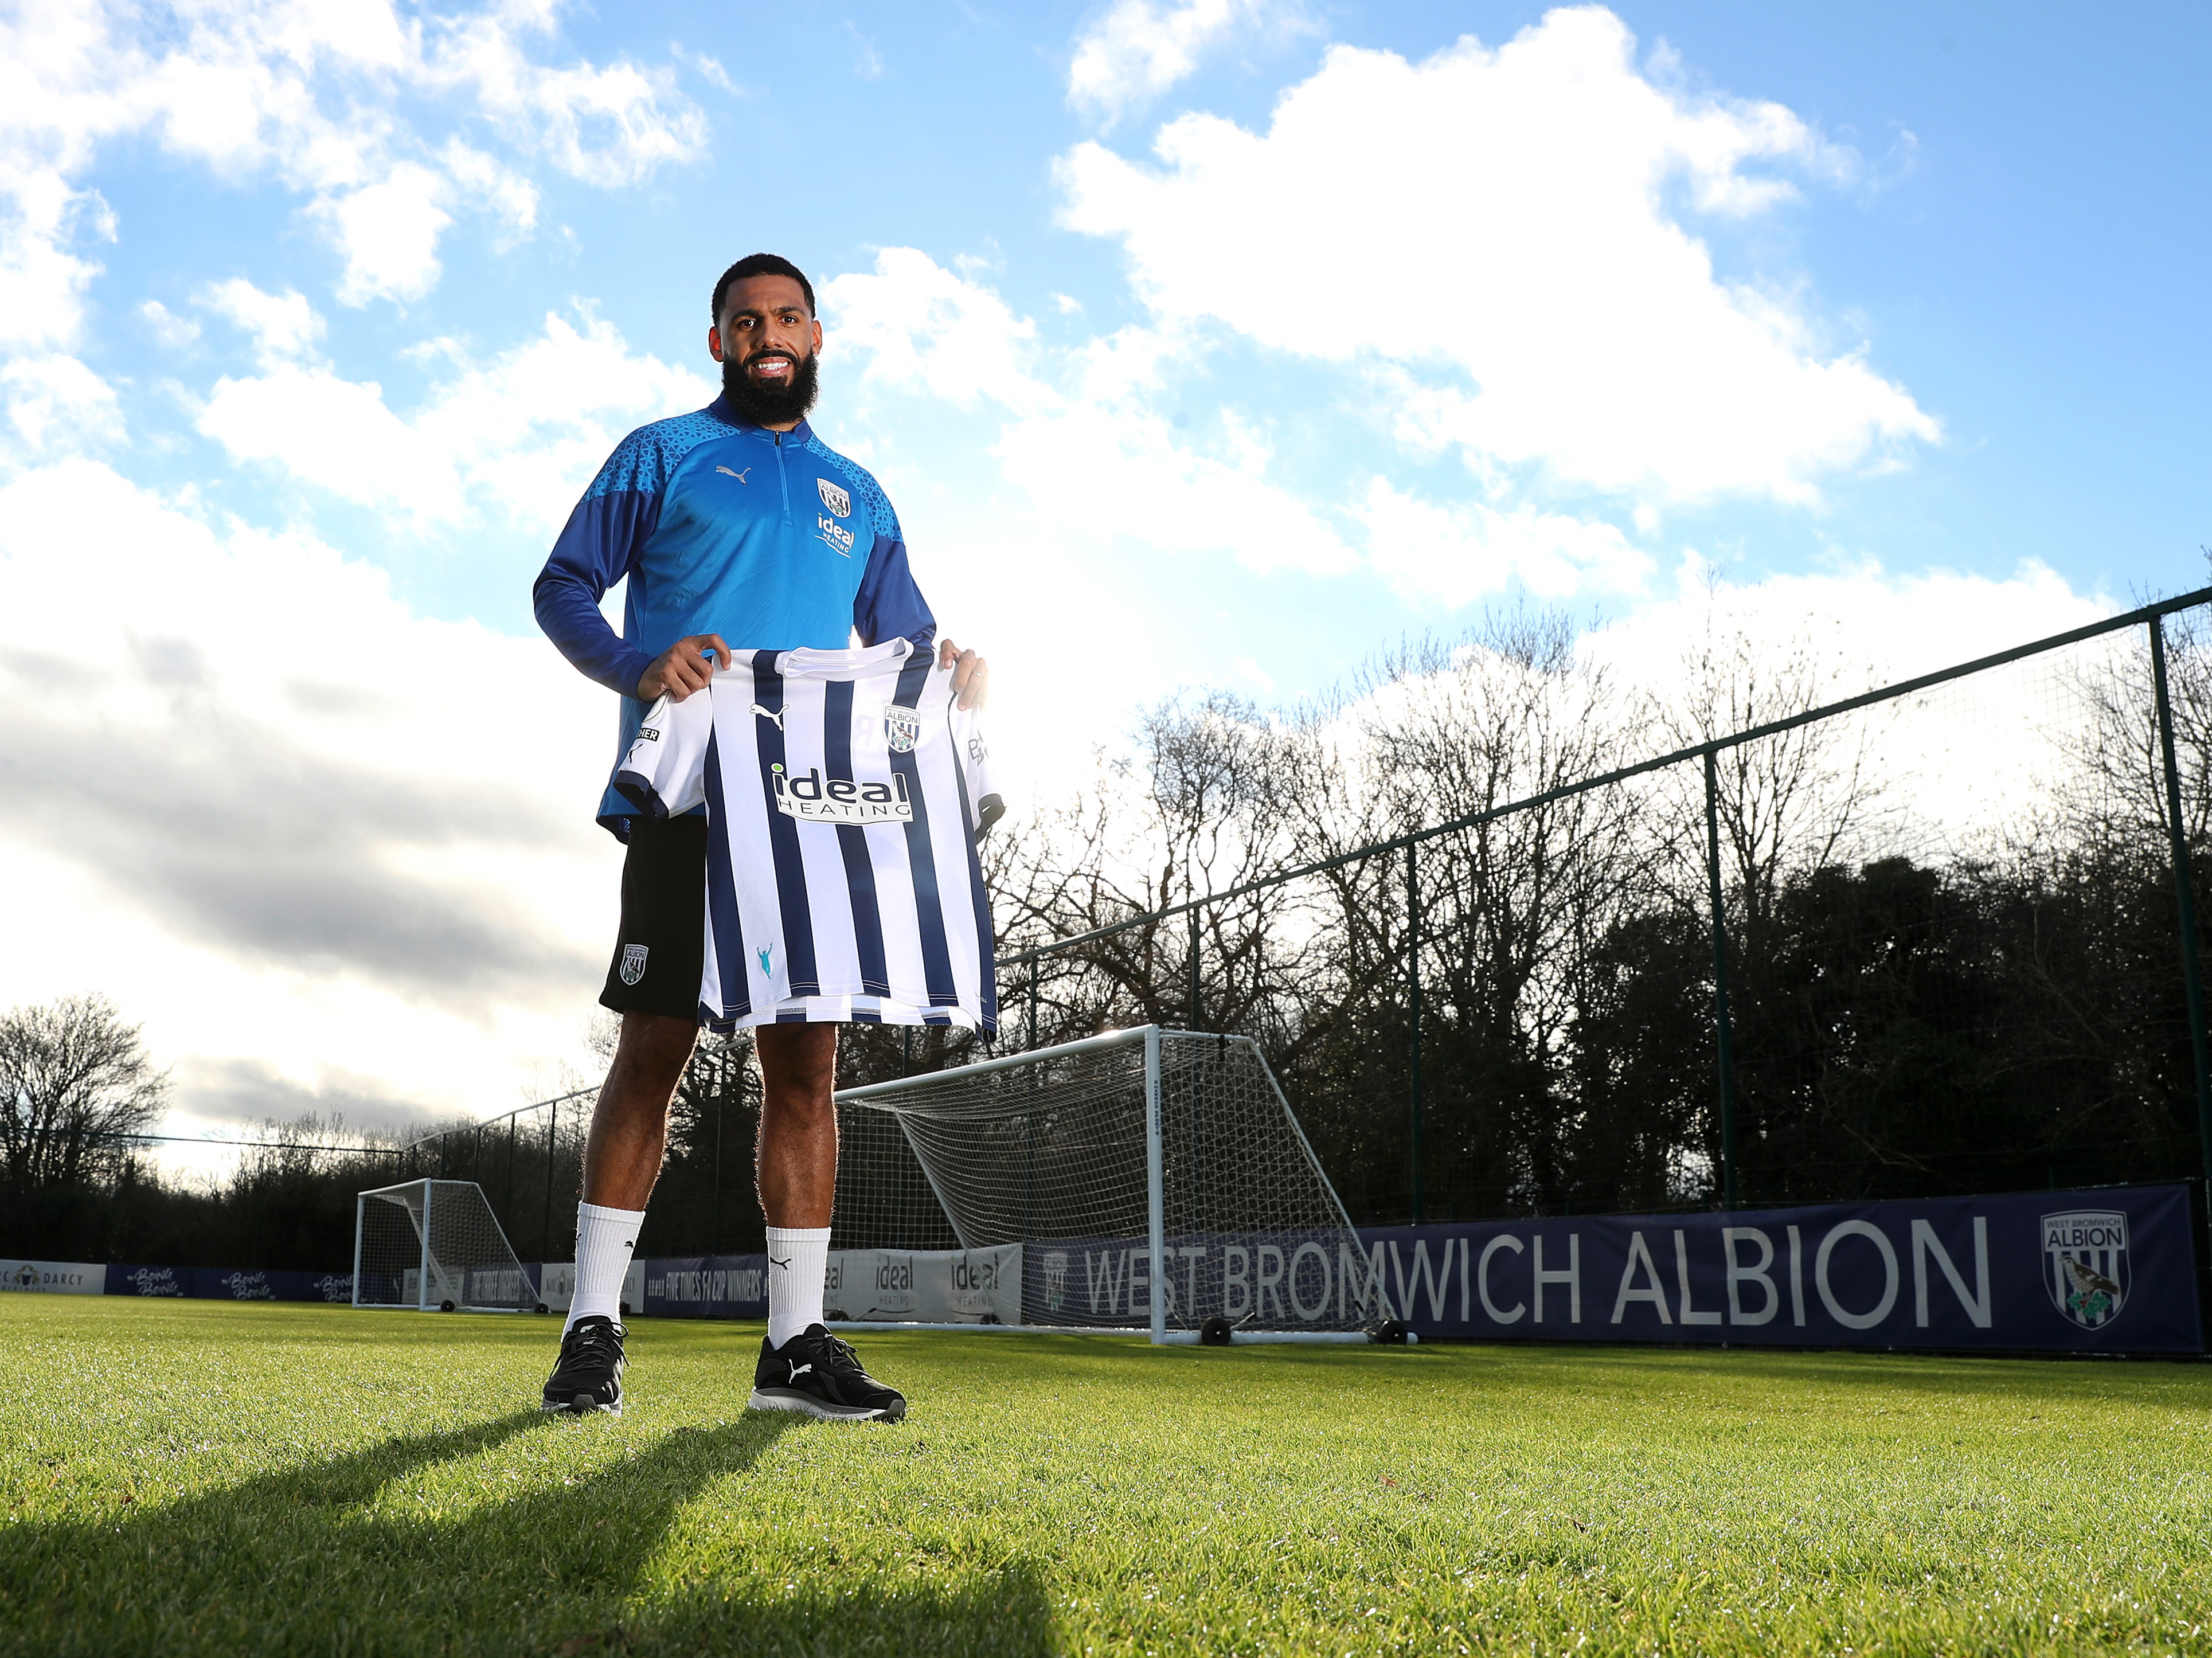 Yann M'Vila posing for a photo stood on the training pitch while holding a home shirt